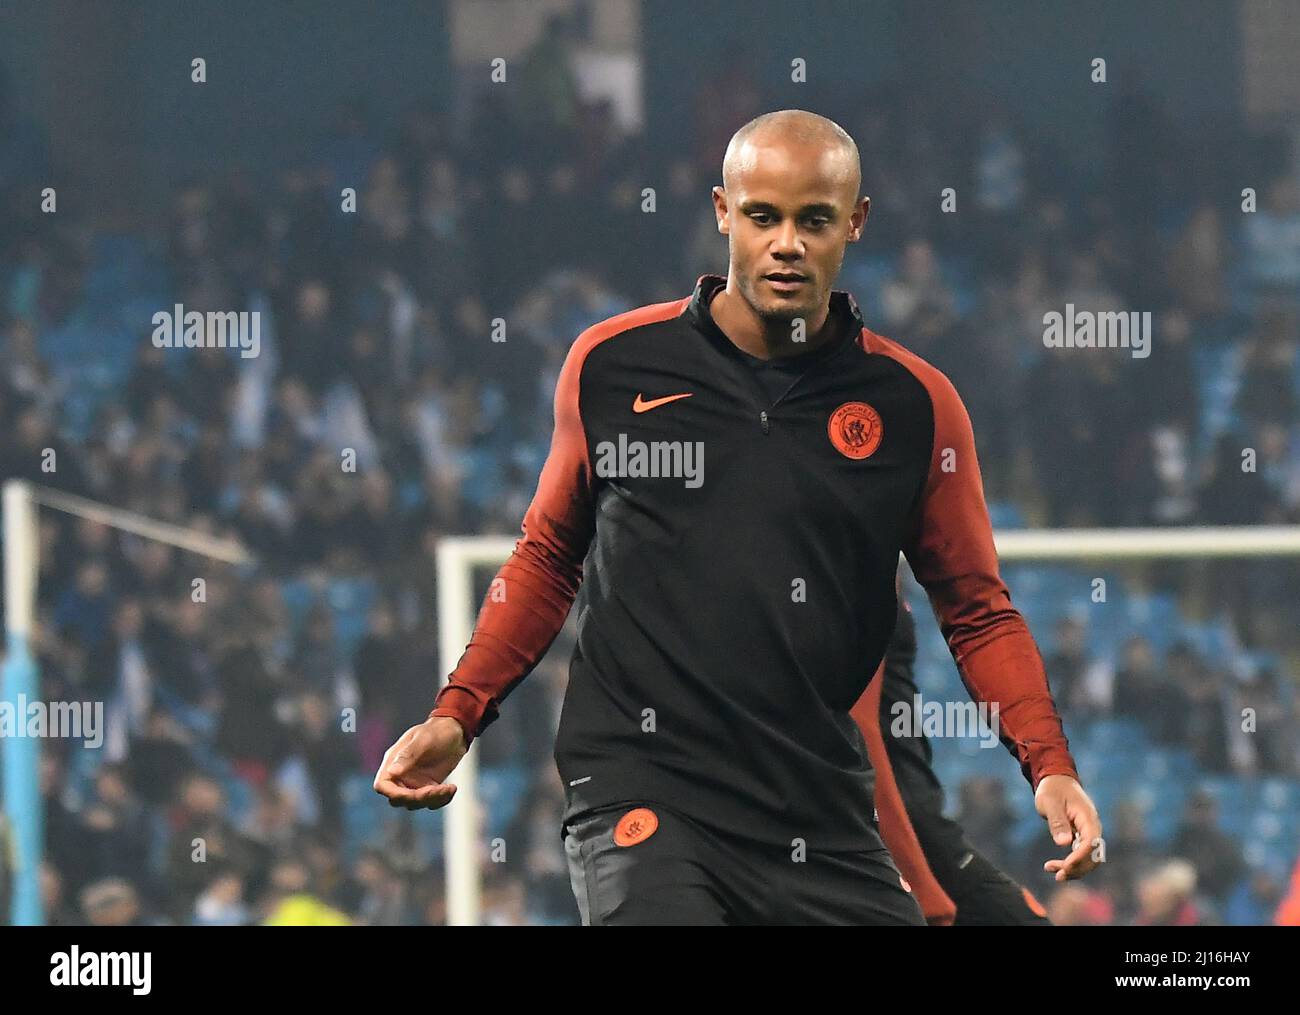 MANCHESTER, ENGLAND - NOVEMBER 1, 2016: Vincent Kompany of City pictured prior to the UEFA Champions League Group C game between Manchester City and FC Barcelona at City of Manchester Stadium. Copyright: Cosmin Iftode/Picstaff Stock Photo